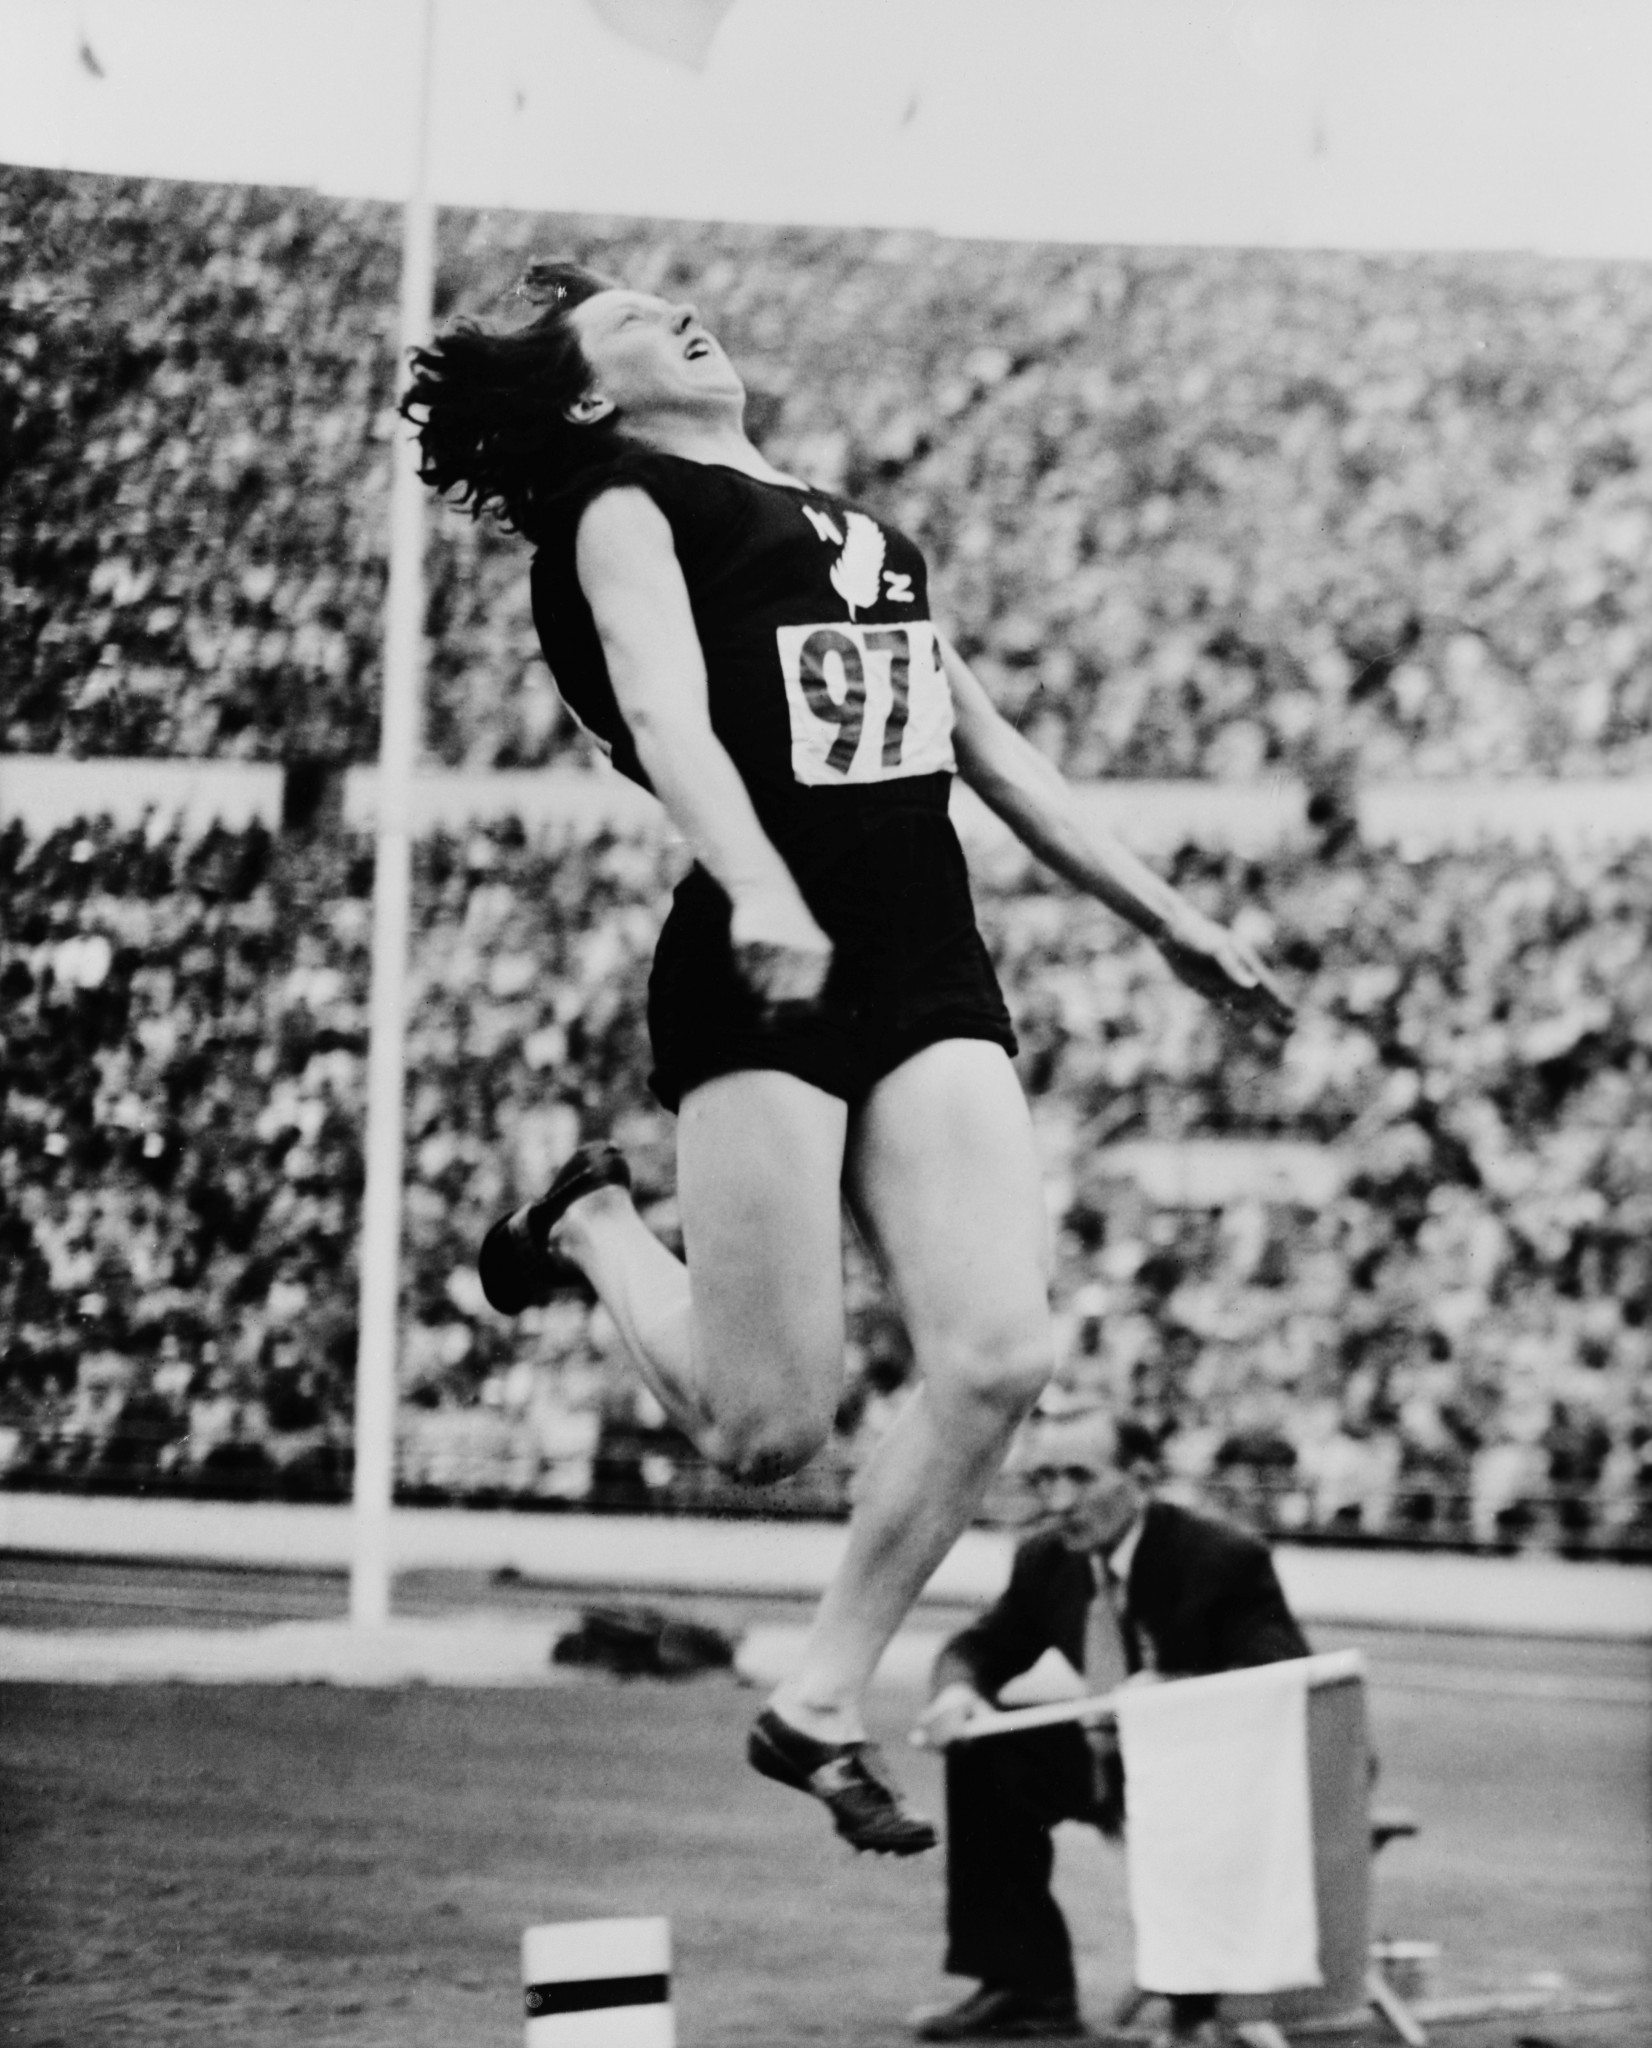 New Zealand's Yvette Williams, who dramatically won the long jump gold medal at the 1952 Olympic Games in Helsinki, has died at the age of 89 ©Getty Images